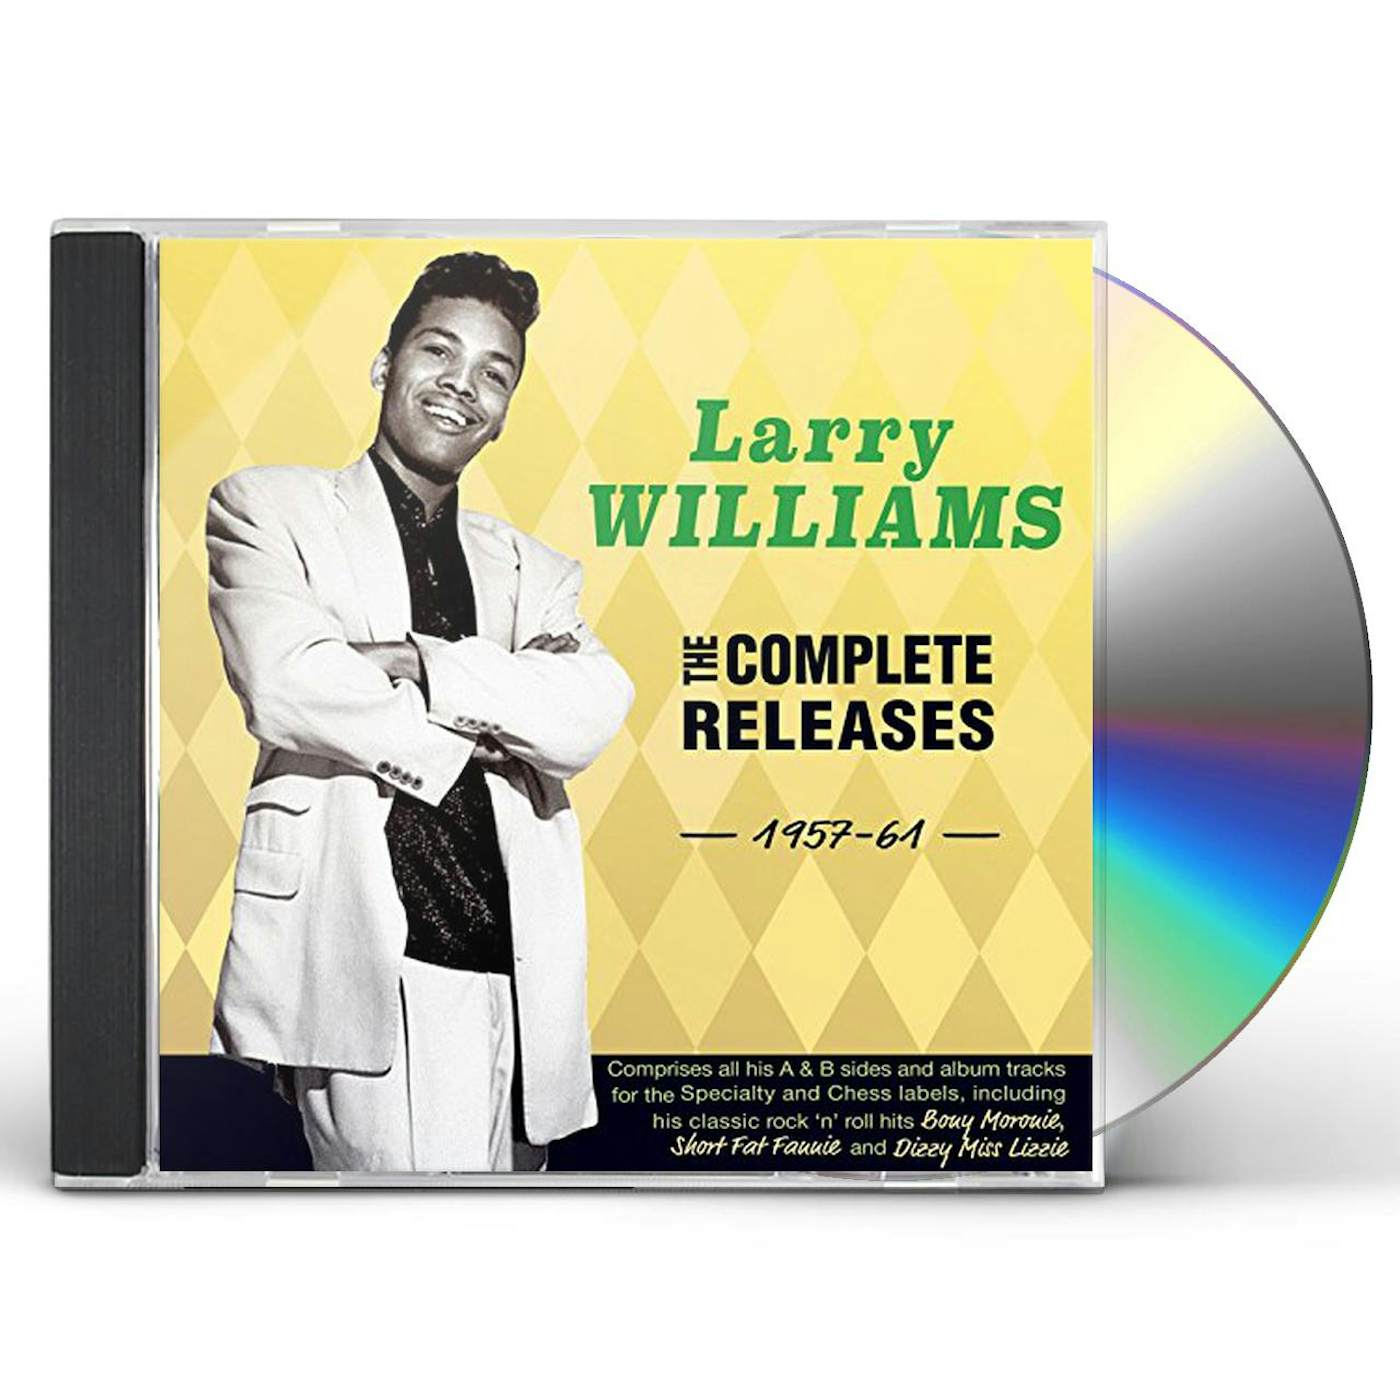 Larry Williams COMPLETE RELEASES 1957-61 CD